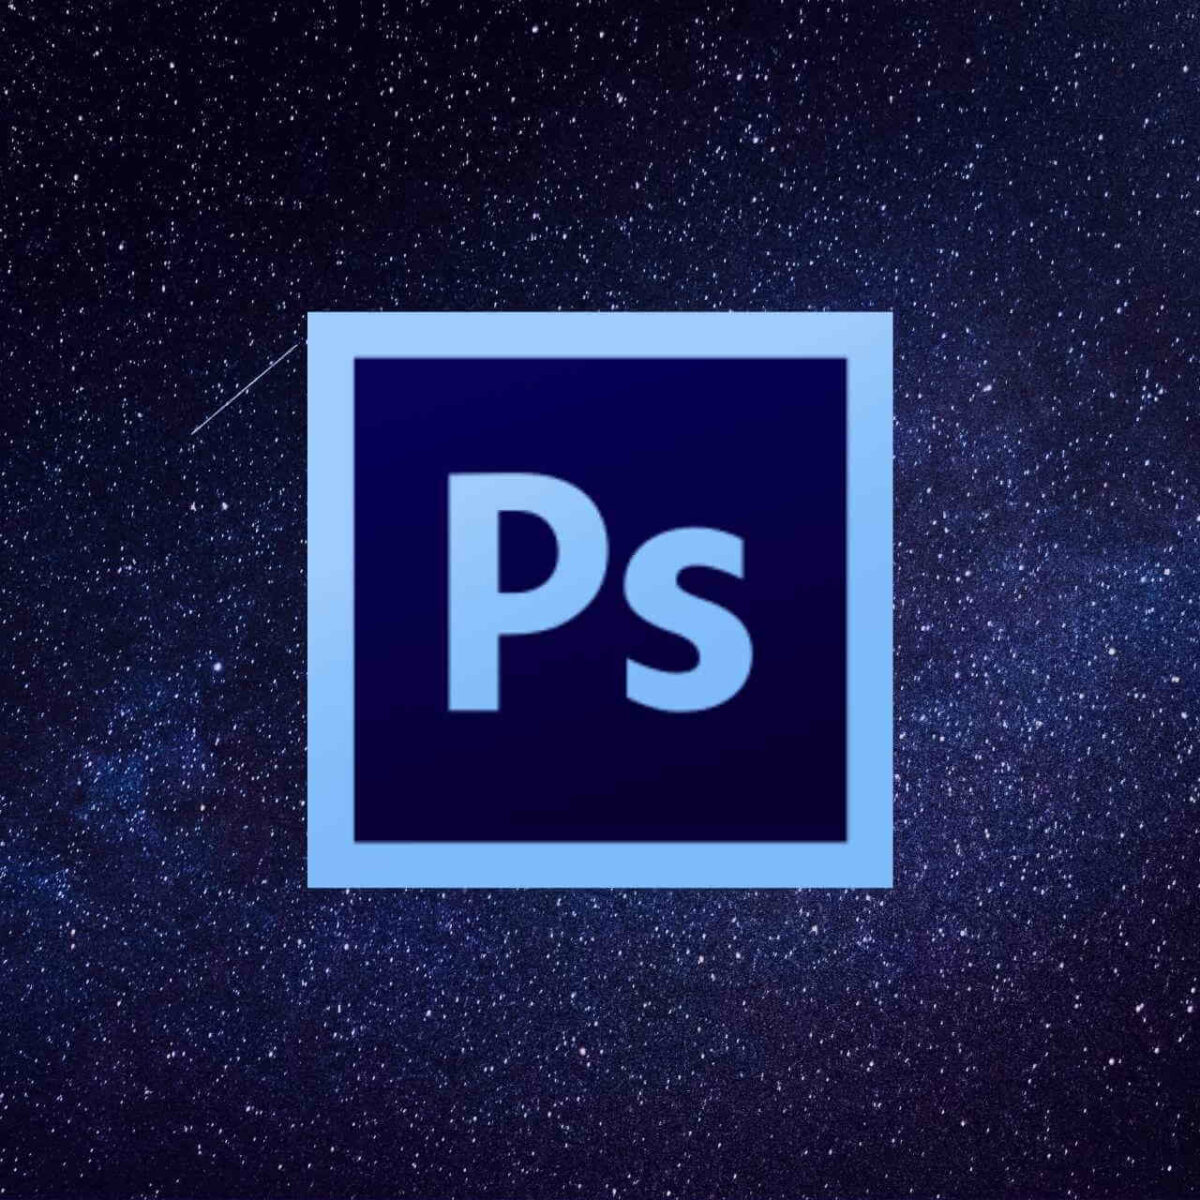 How to fix font size problems in Photoshop